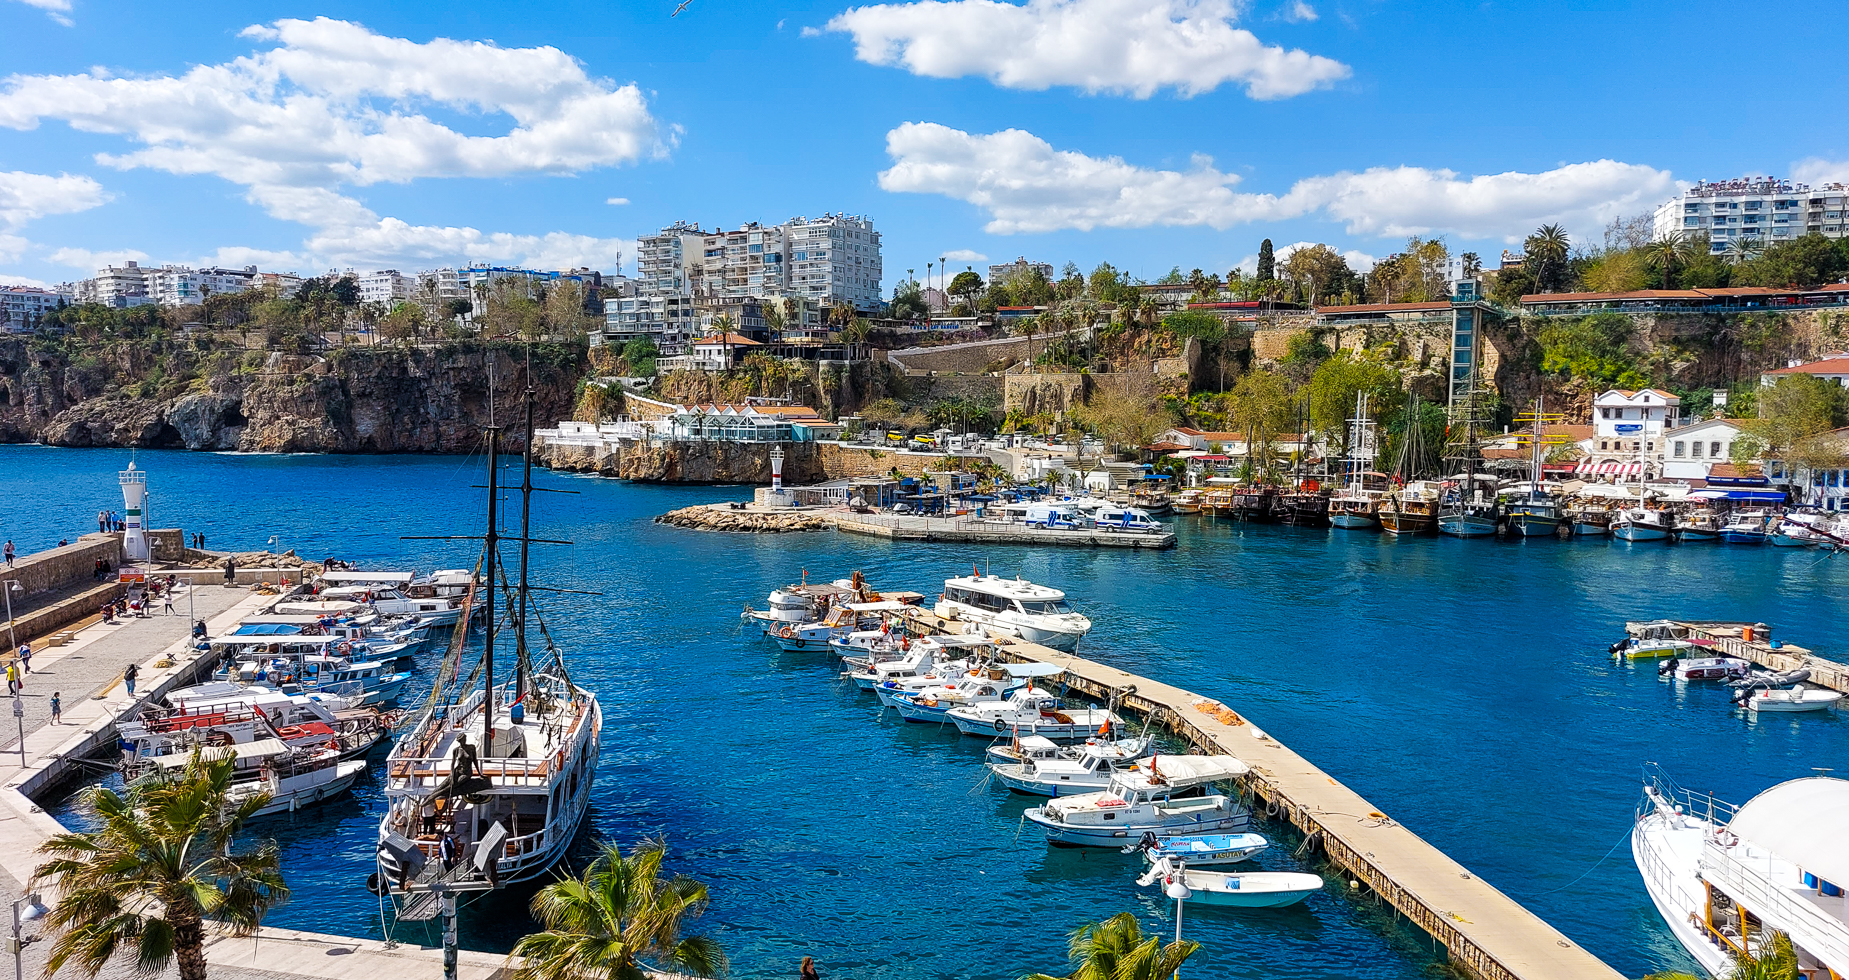 <span  class="uc_style_uc_tiles_grid_image_elementor_uc_items_attribute_title" style="color:#ffffff;">Harbor of Antalya</span>